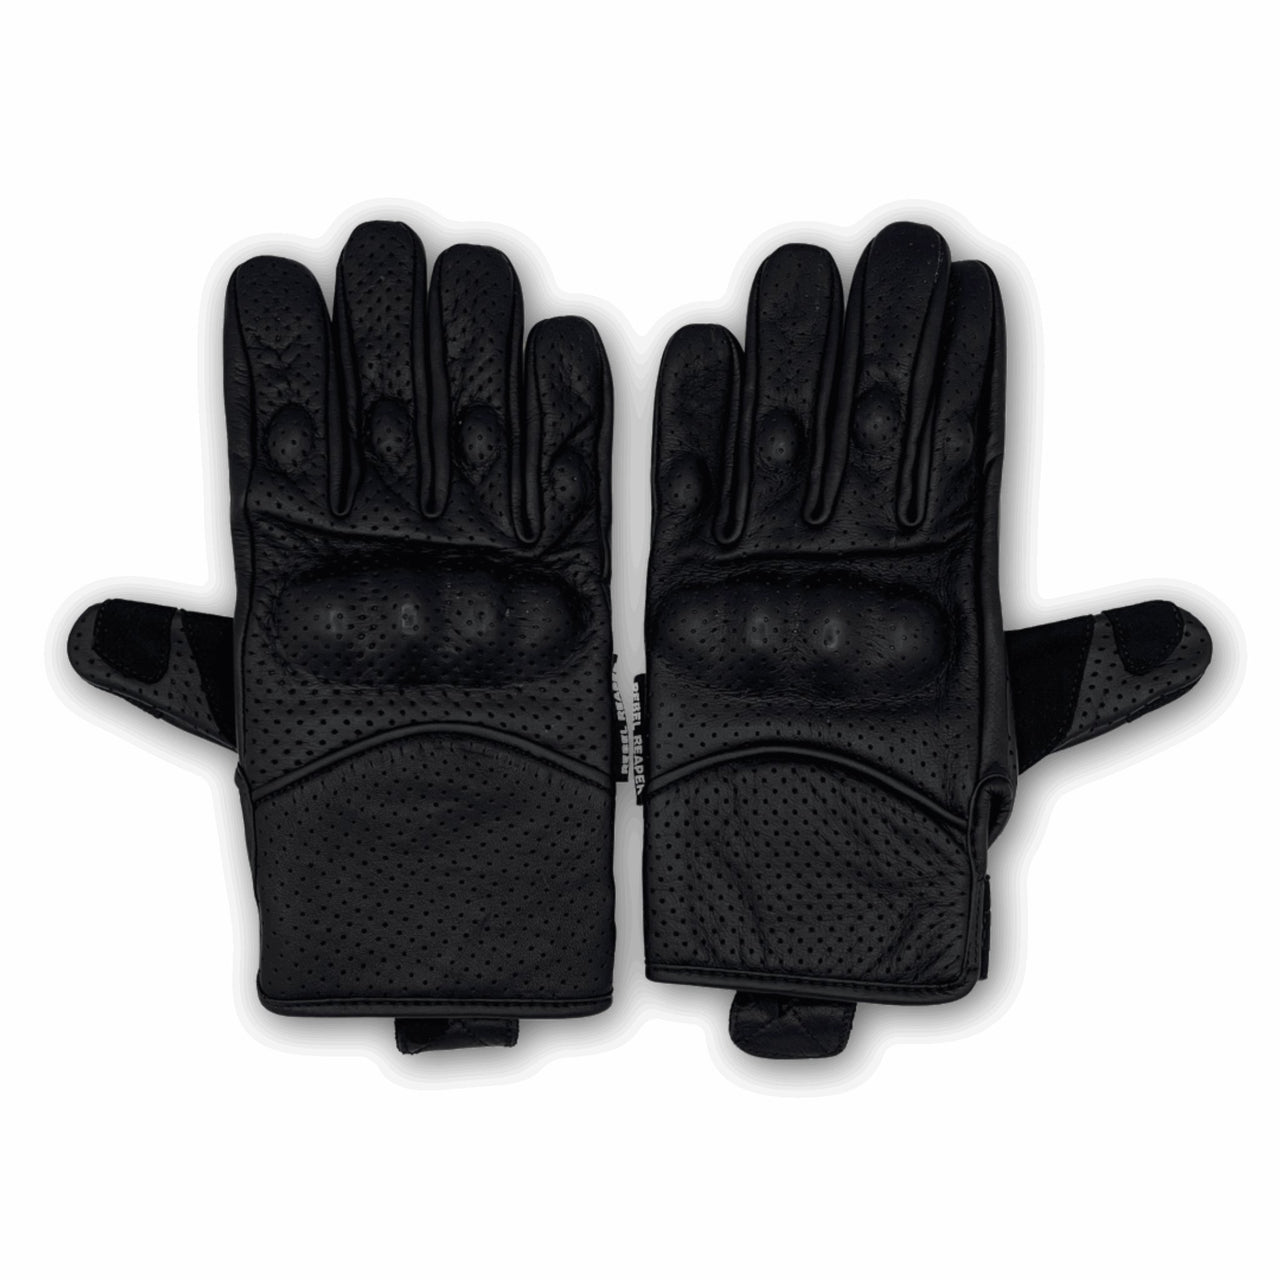 Leather Perforated Motorcycle Riding Gloves - Modern - Black - Rebel Reaper Clothing Company Leather Gloves